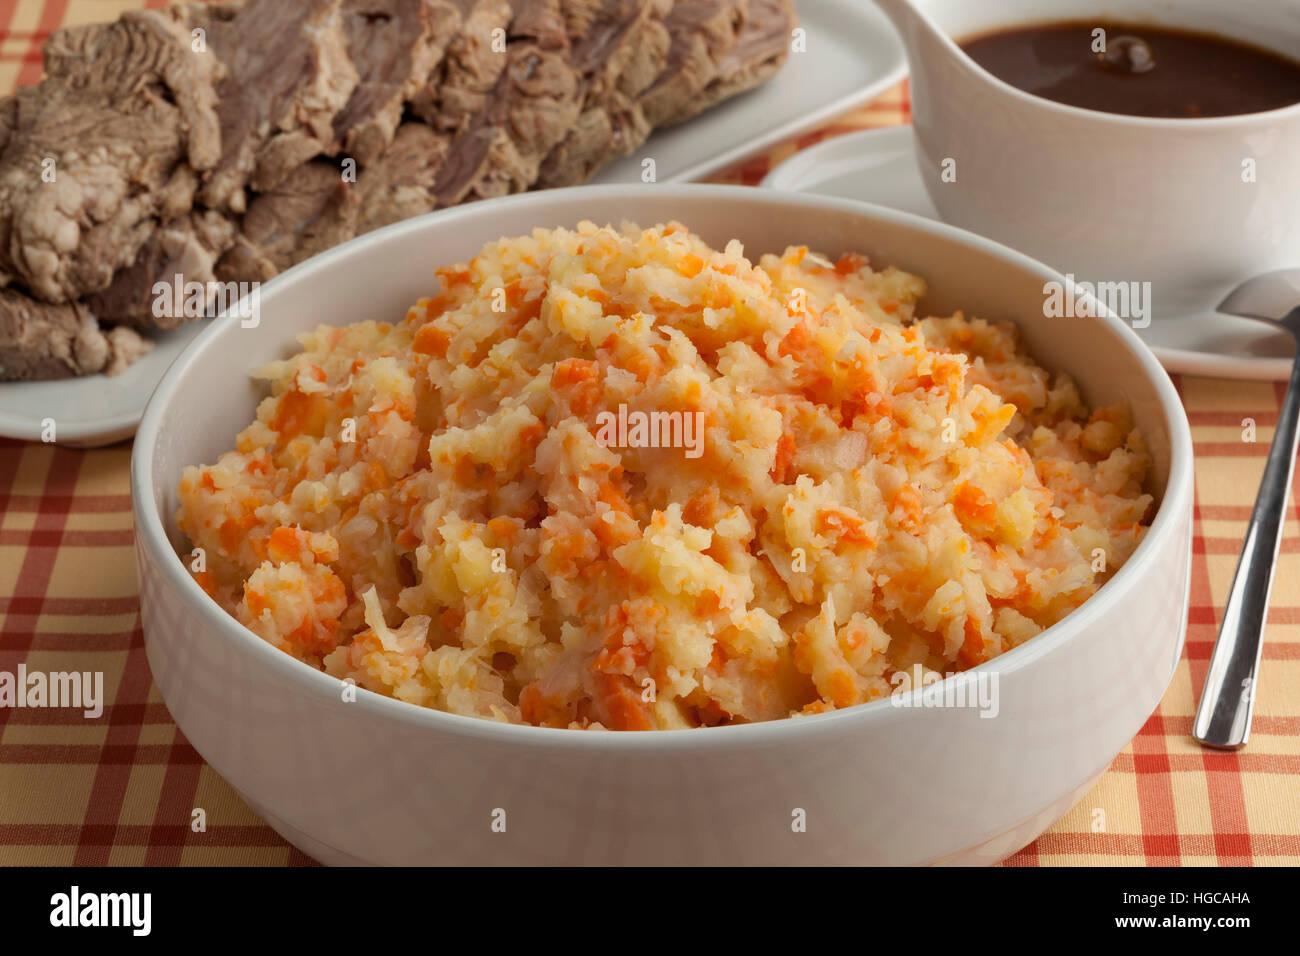 Bowl with traditional dutch stew, meat and gravy Stock Photo